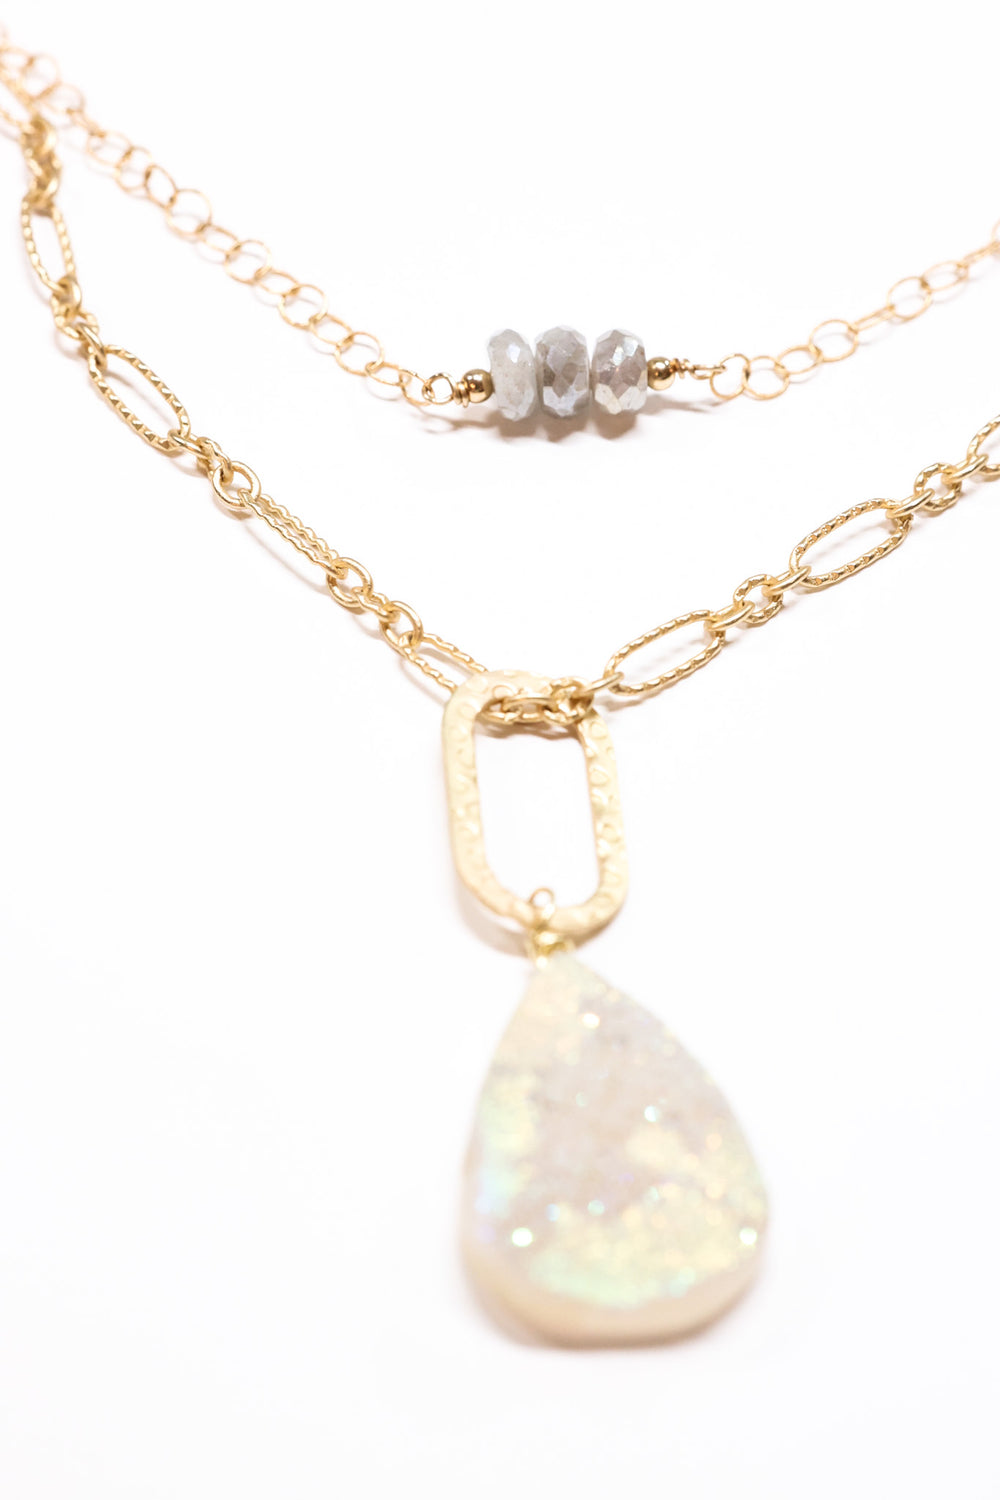 Drusy necklace shown layered with shorter necklace